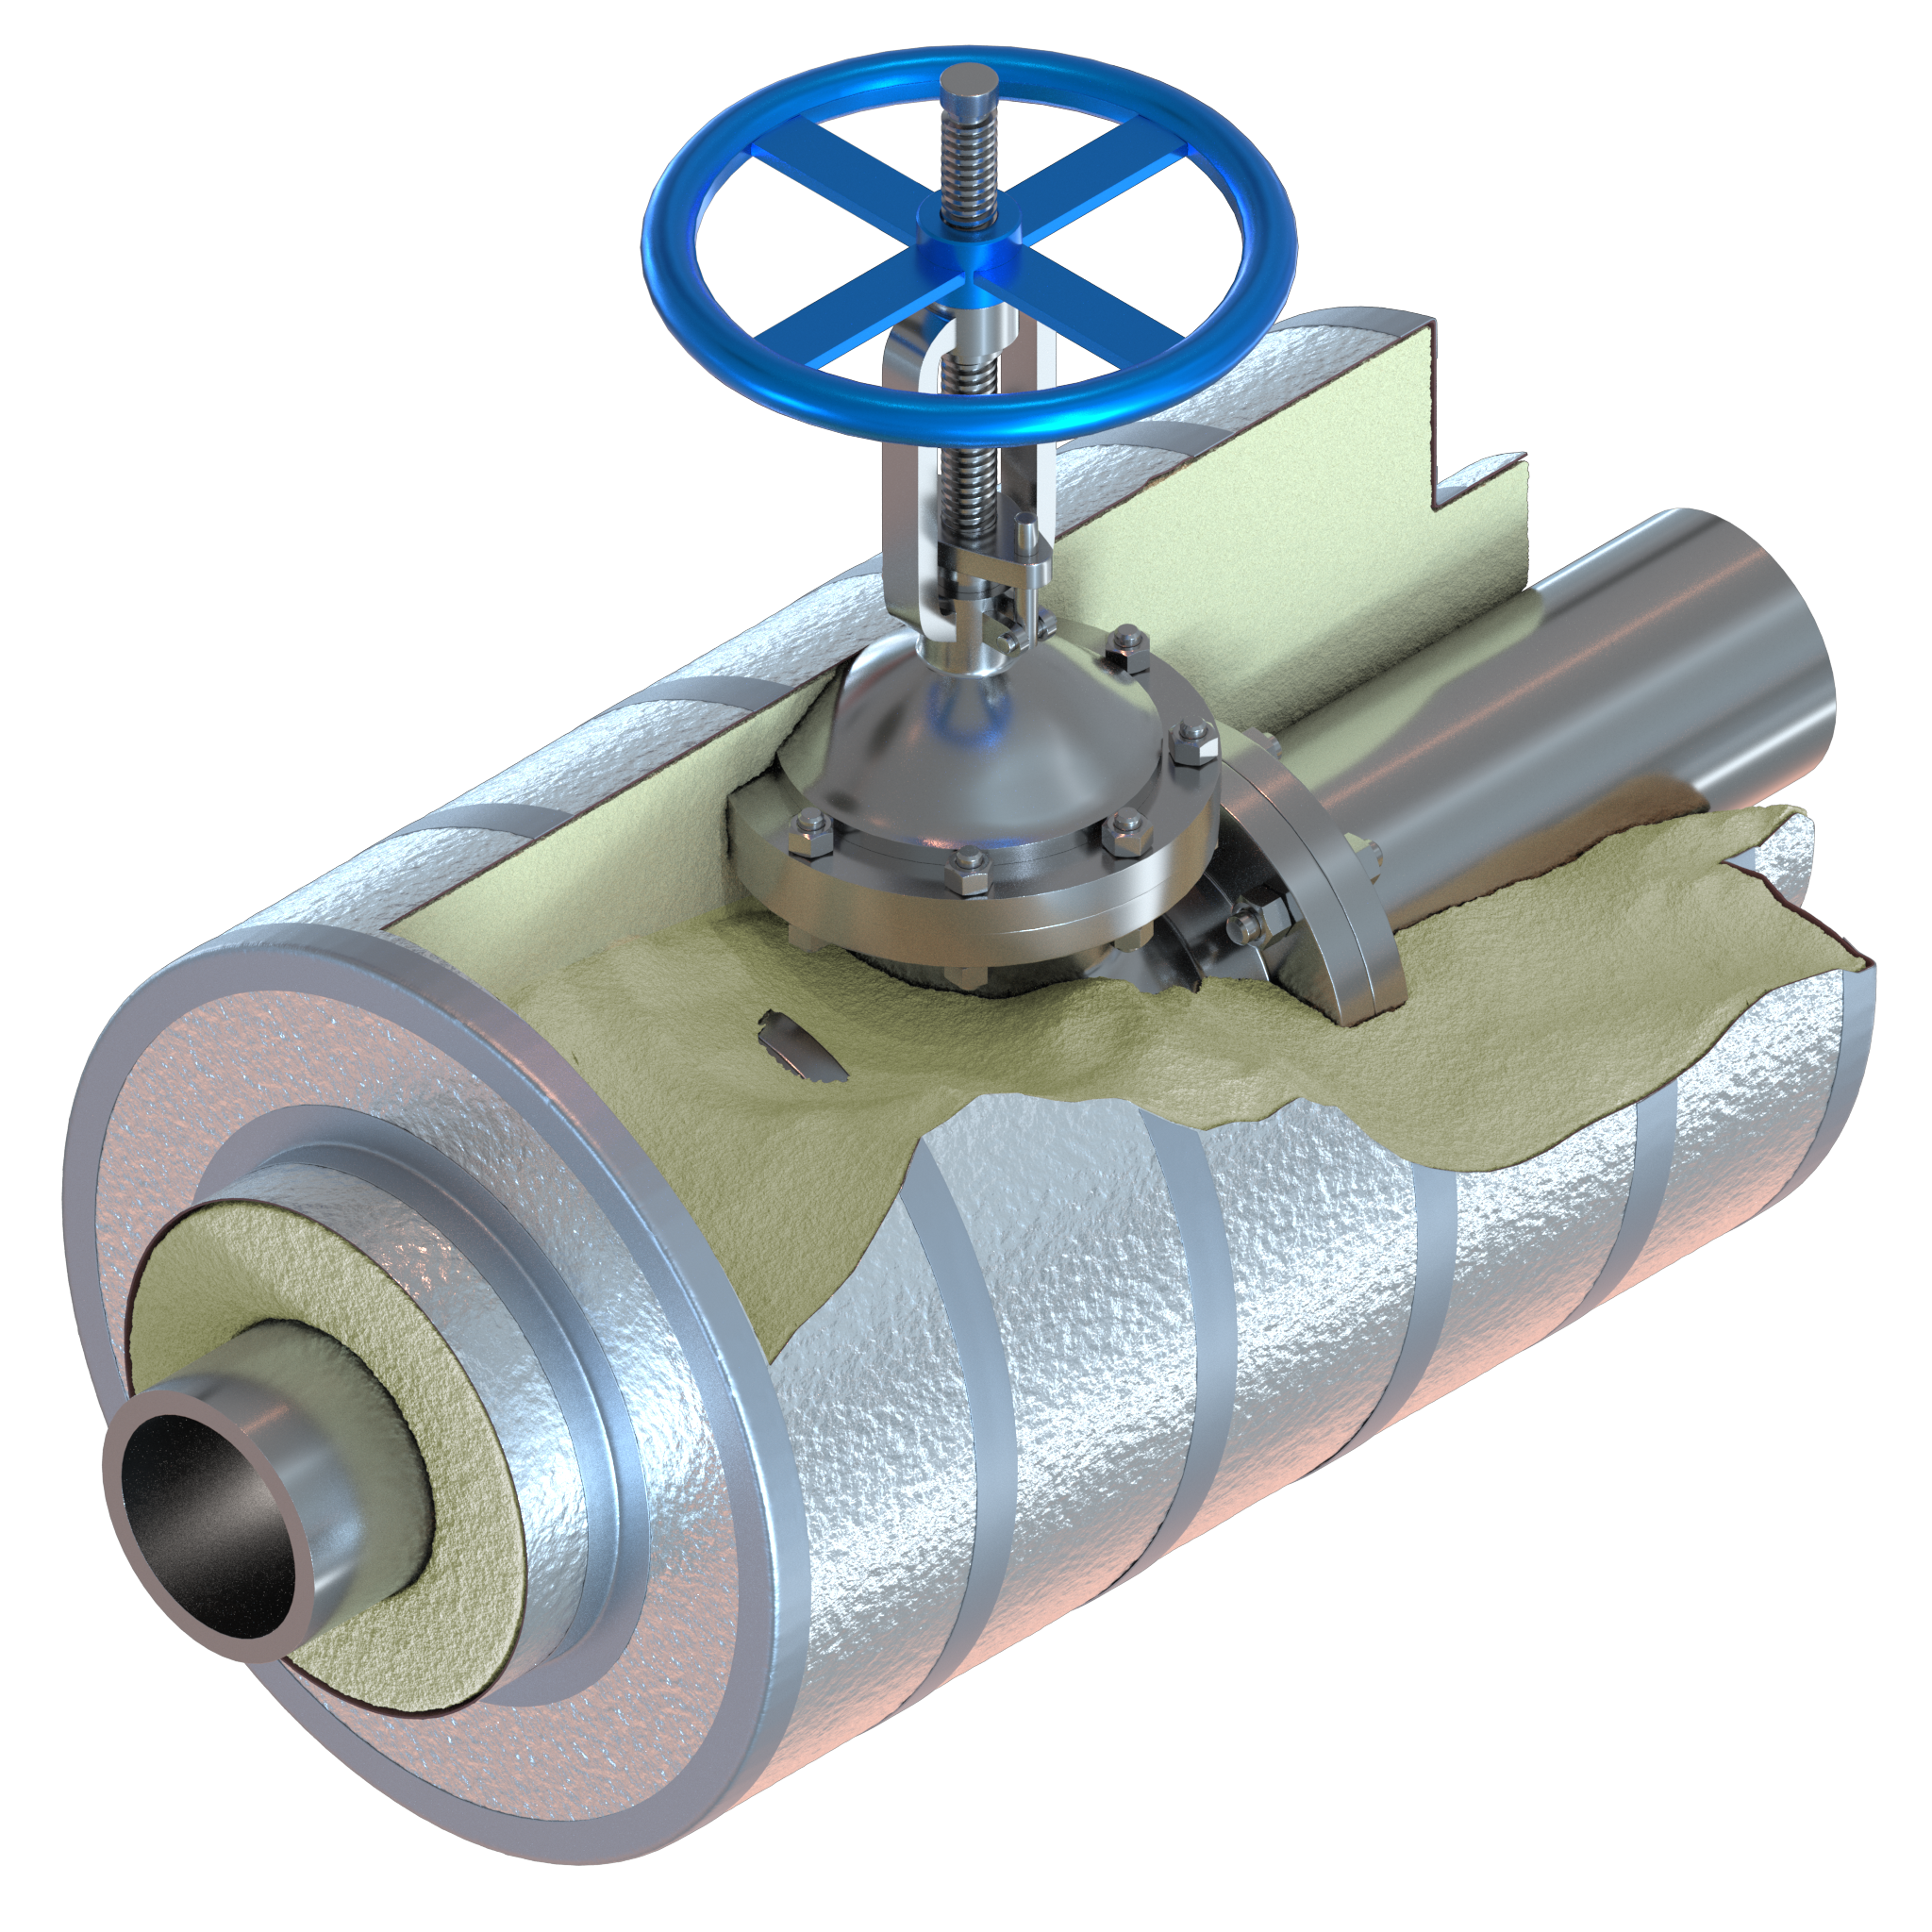 Product rendering of an isolated valve